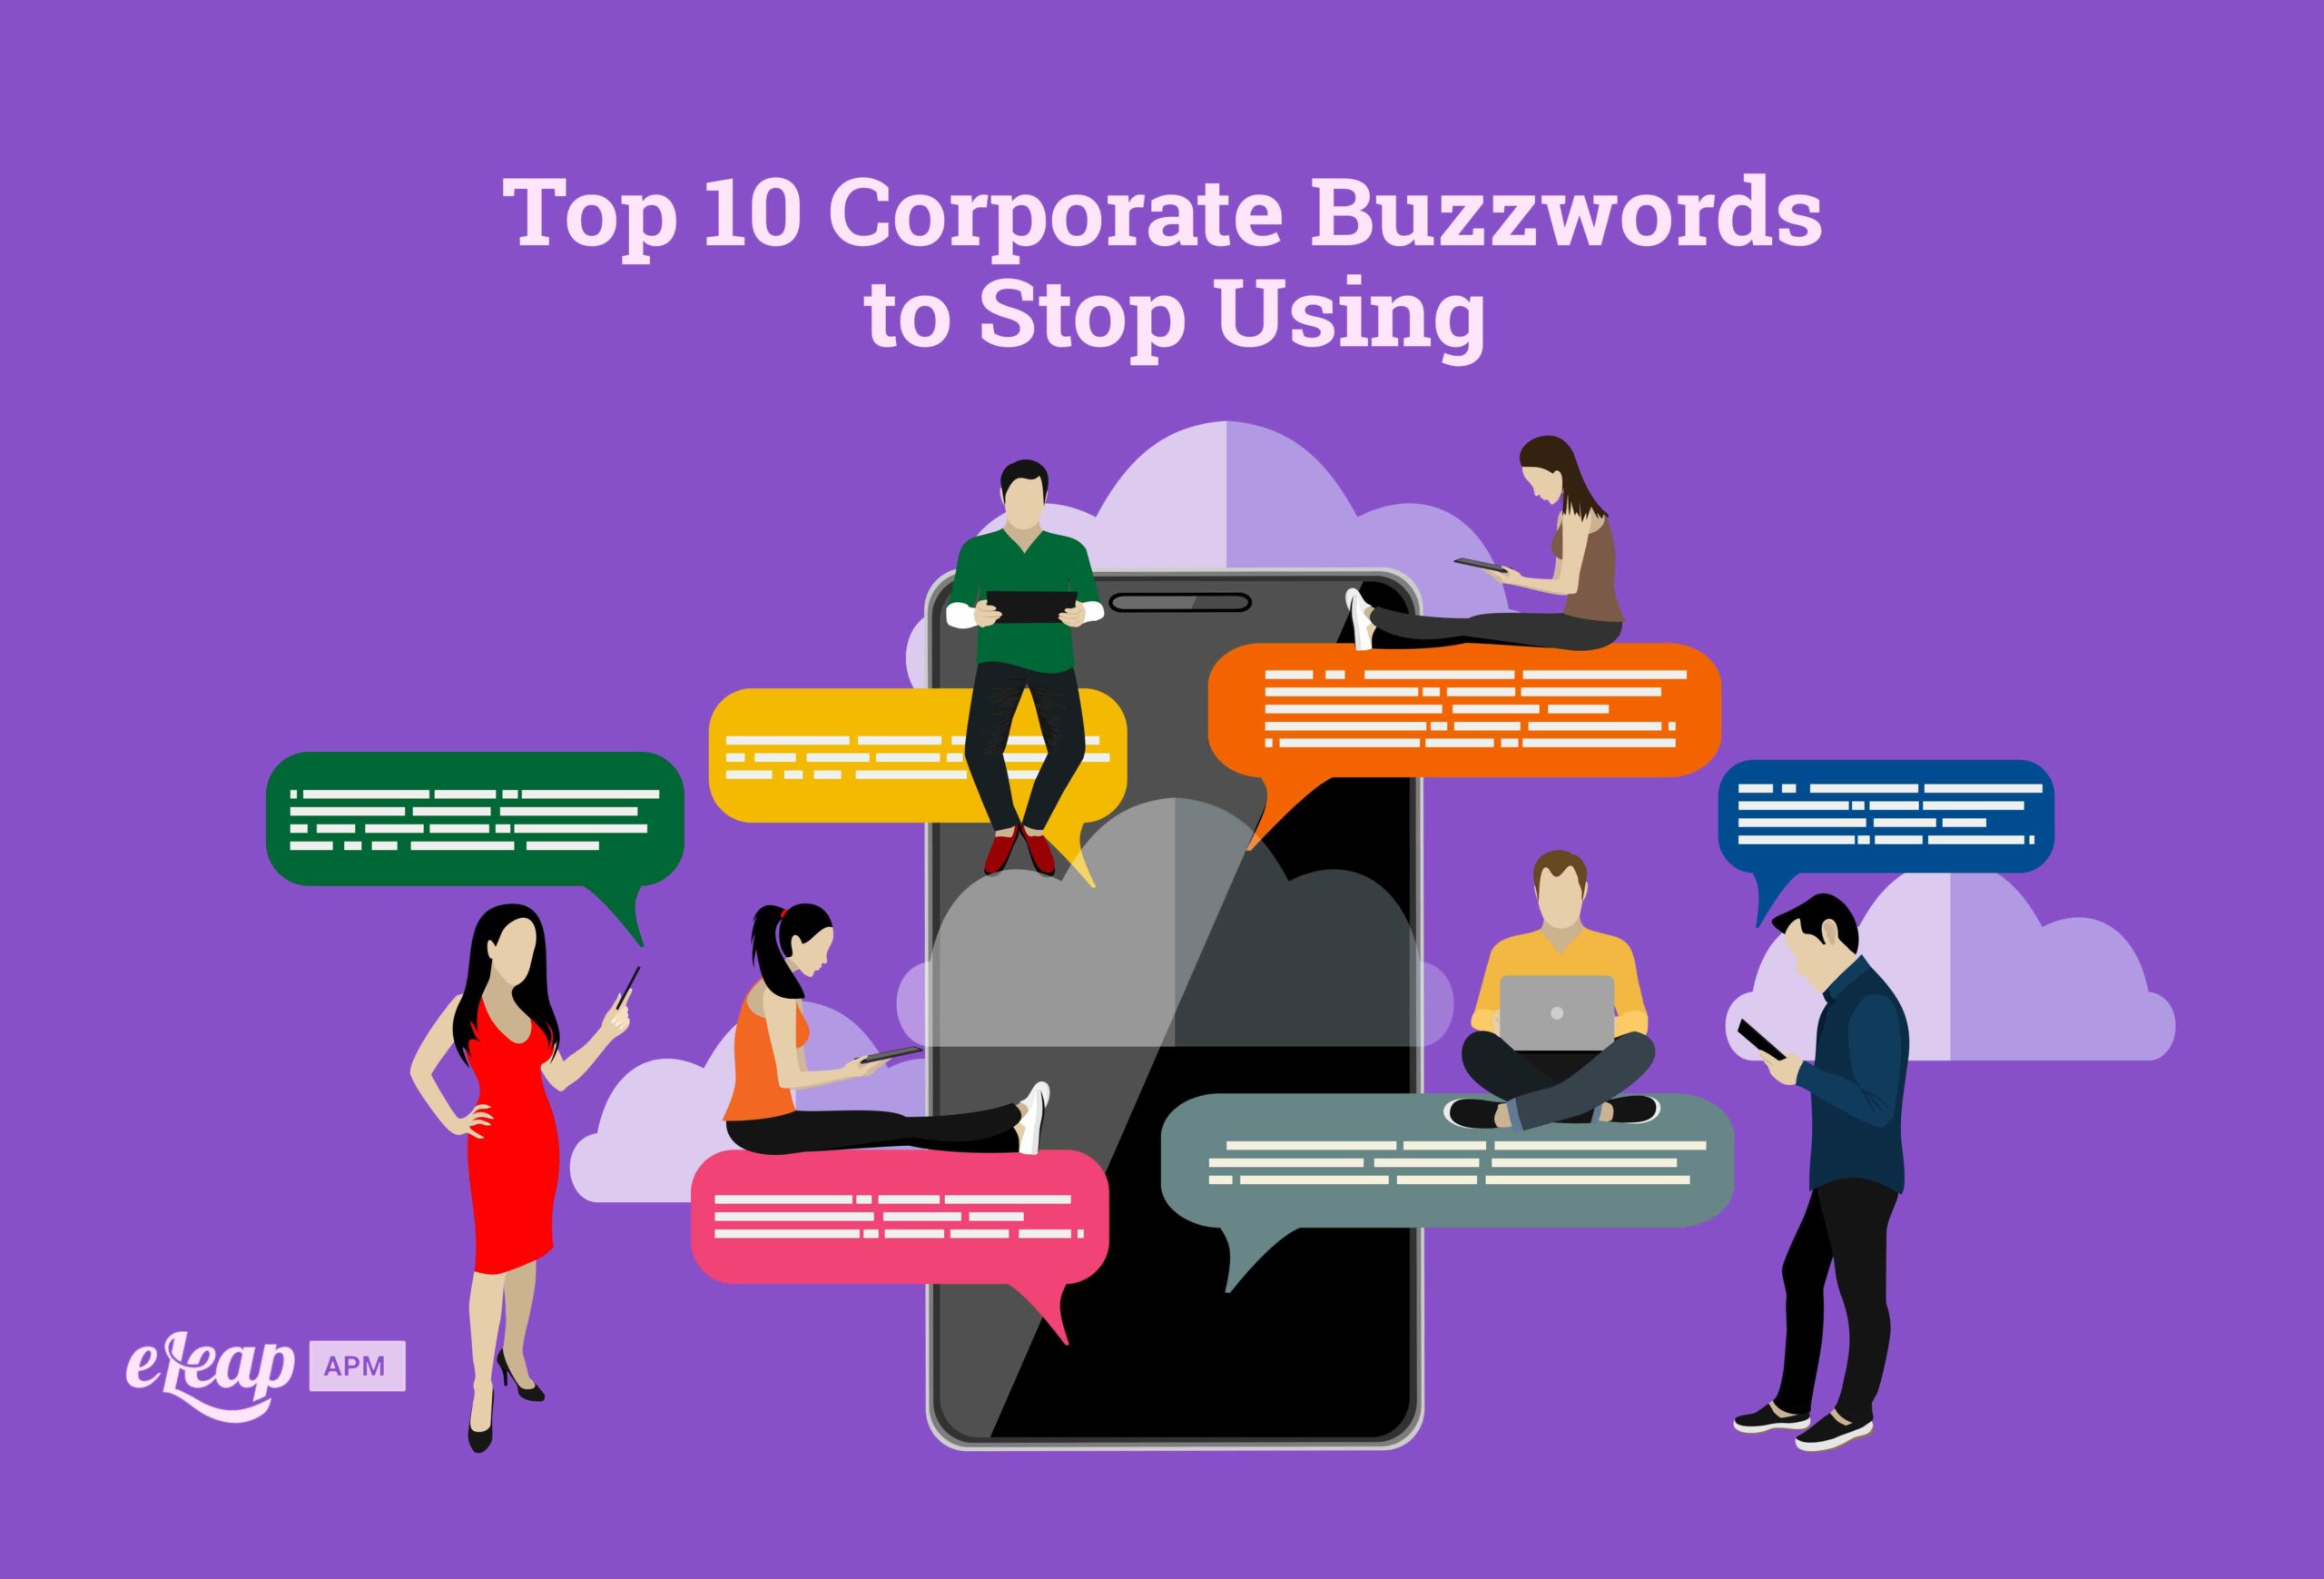 Top 10 Corporate Buzzwords to Stop Using